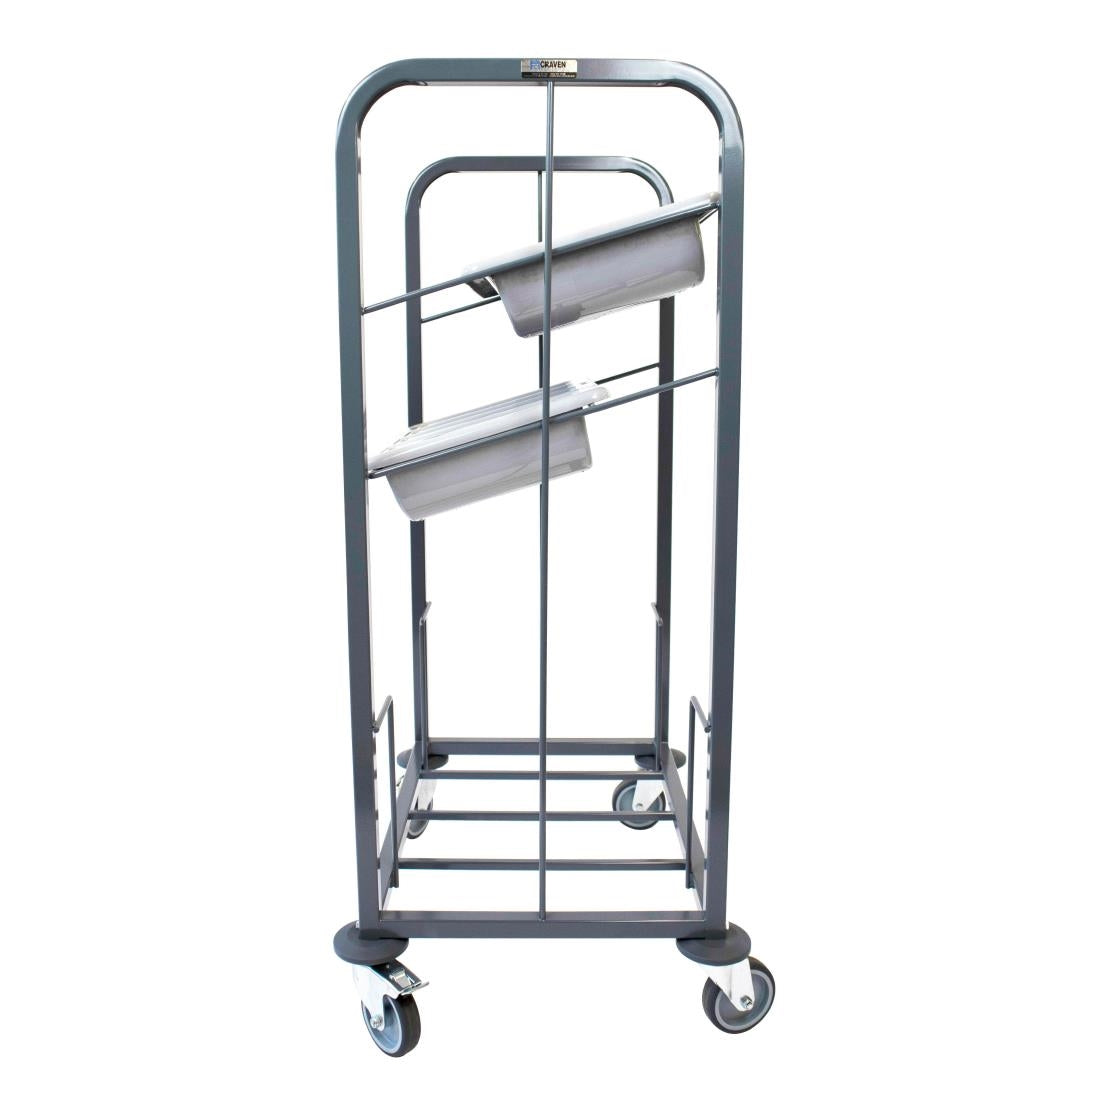 GG139 Craven Steel Two Tier Cutlery and Tray Dispense Trolley JD Catering Equipment Solutions Ltd